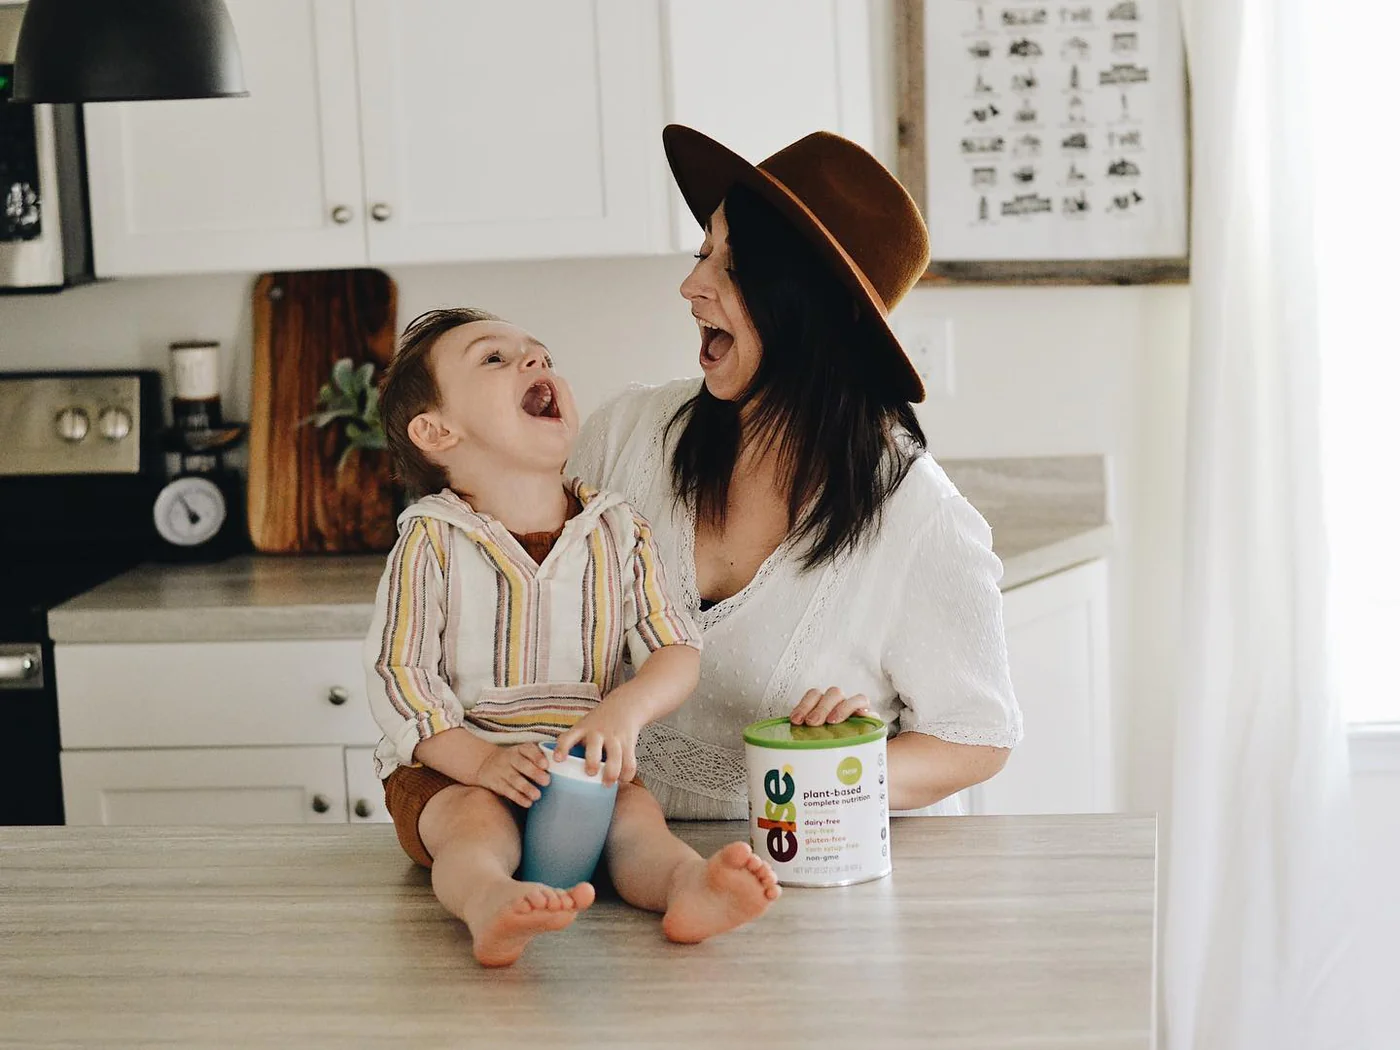 A woman and a child sitting on a kitchen counter with baby formula next to them.